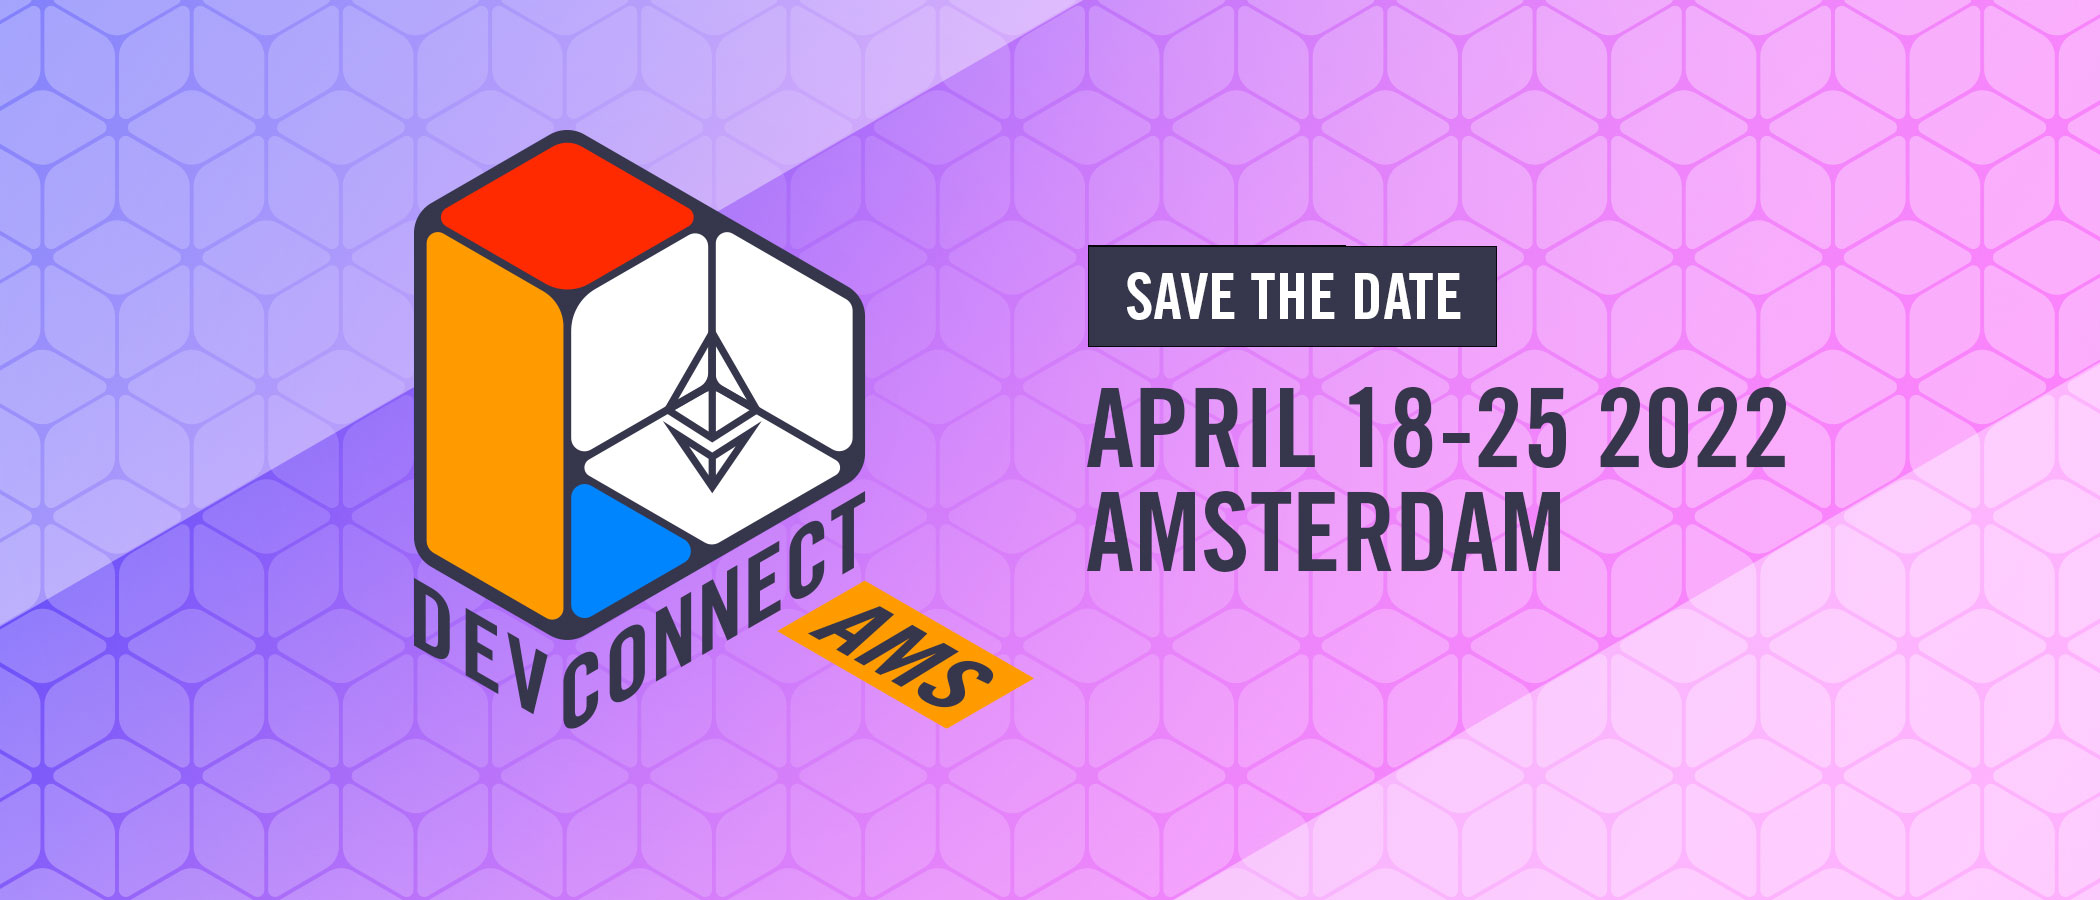 Devconnect: 18-25 April 2022 in Amsterdam